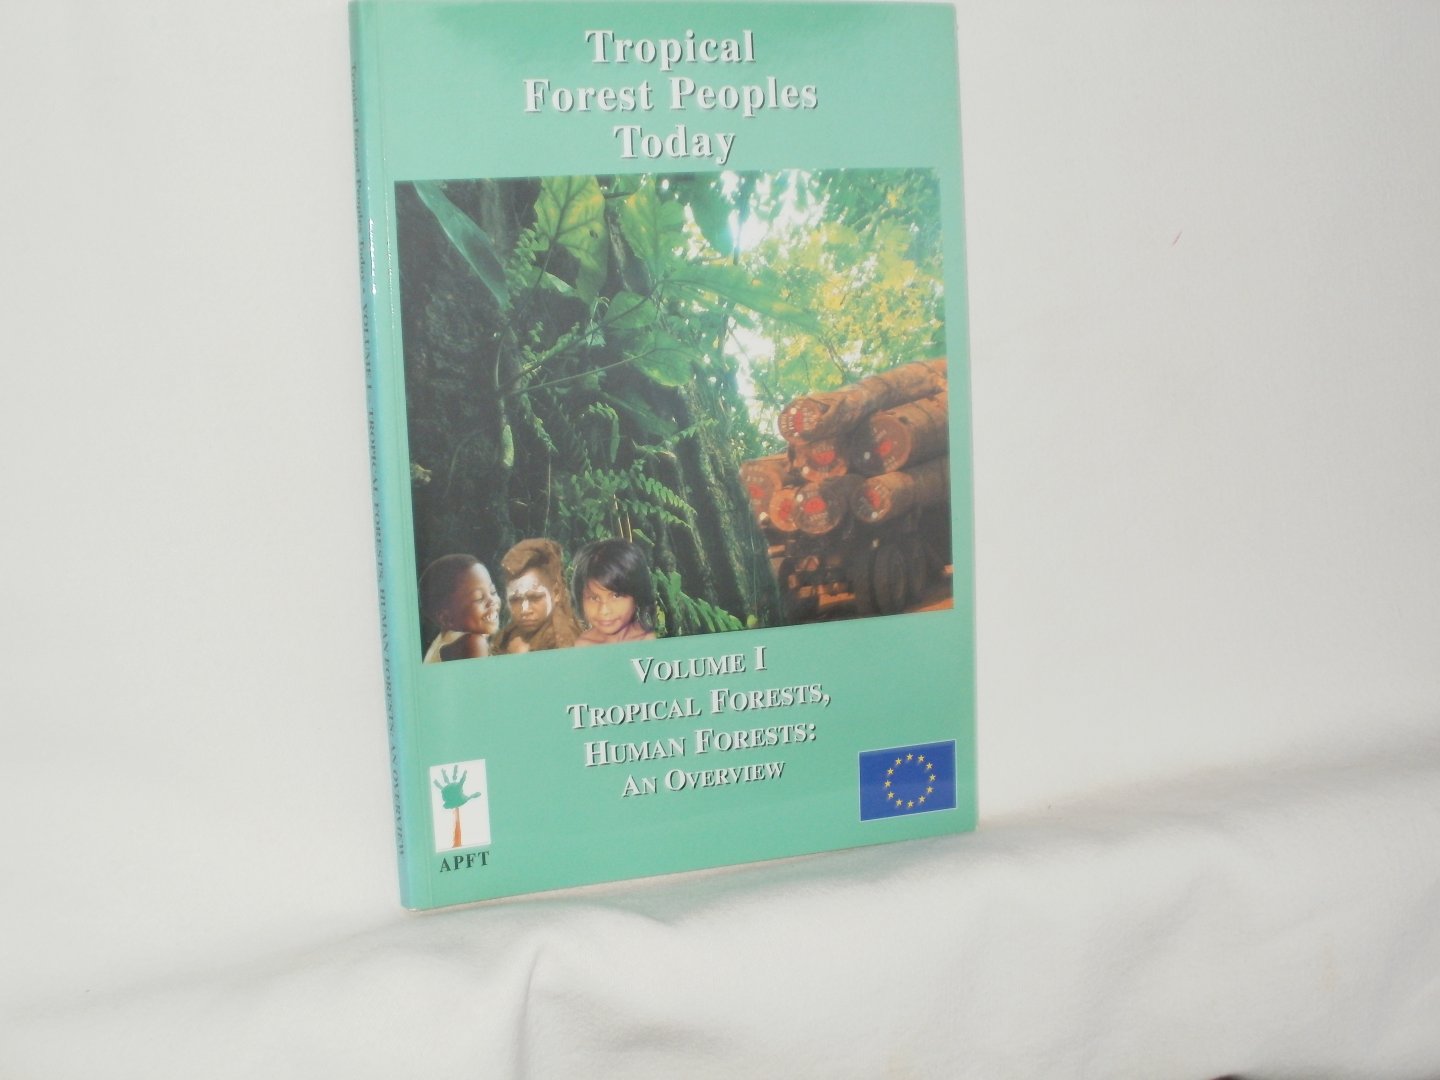 Bahuchet, Serge; Grenand, Francoise; Grenand, Pierre; Maret, Pierre de. Trefon, Theodore (translation) - Tropical Forest Peoples Today. Tropical Forests, Human Forests: an Overview. Adapted from the original French version by Theodore Trefon. Volume I of a multi-volume APFT report